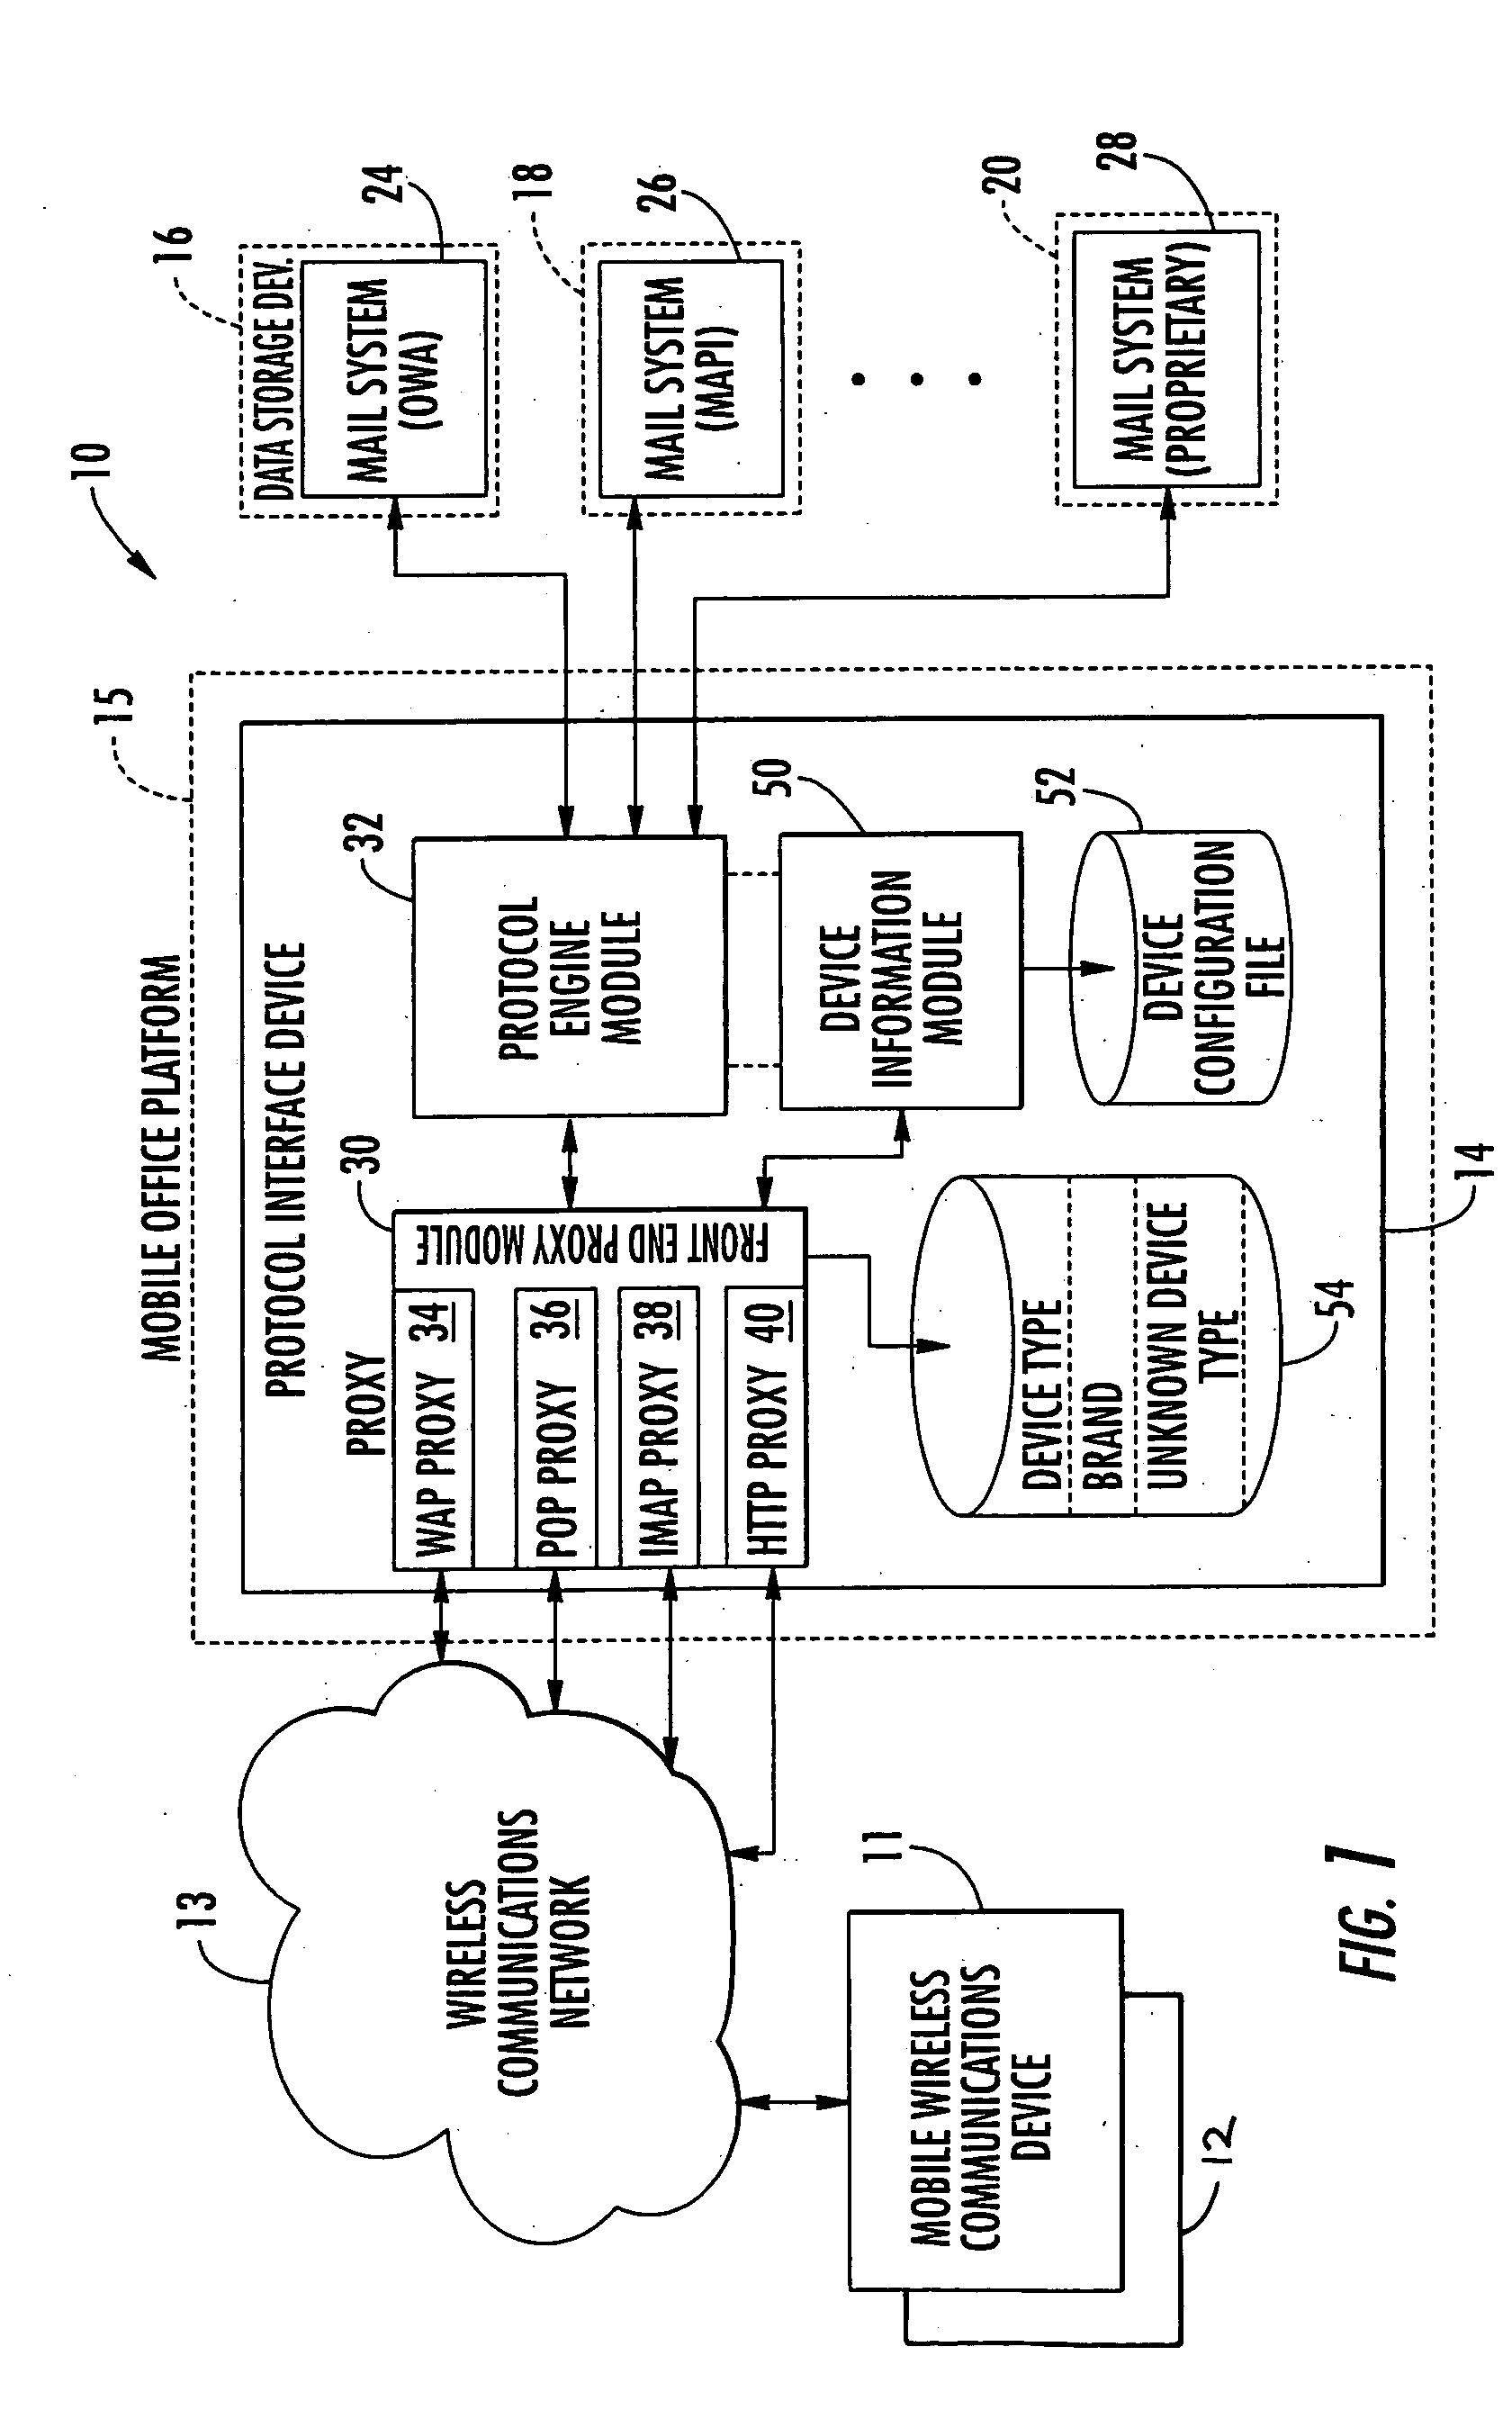 Communications system with interface for enabling communication of alerts to mobile wireless communications devices